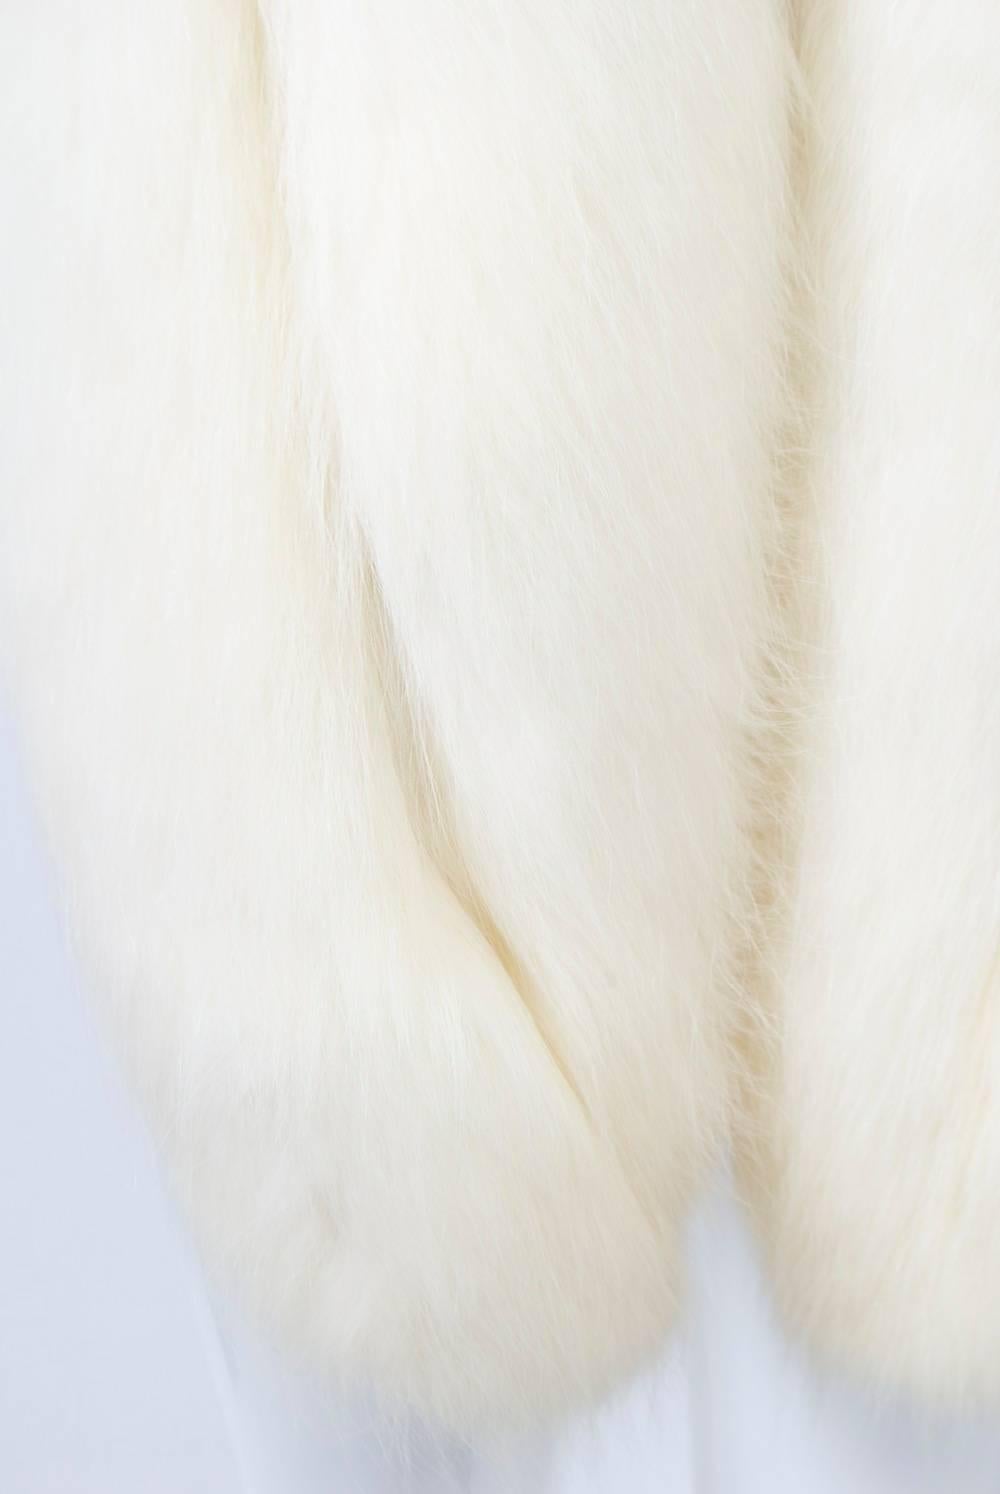 Glamorous white fox stole, double skin deep and long, curved to round points at ends. Lined in white satin with interior pockets. Fur is dense and lush.